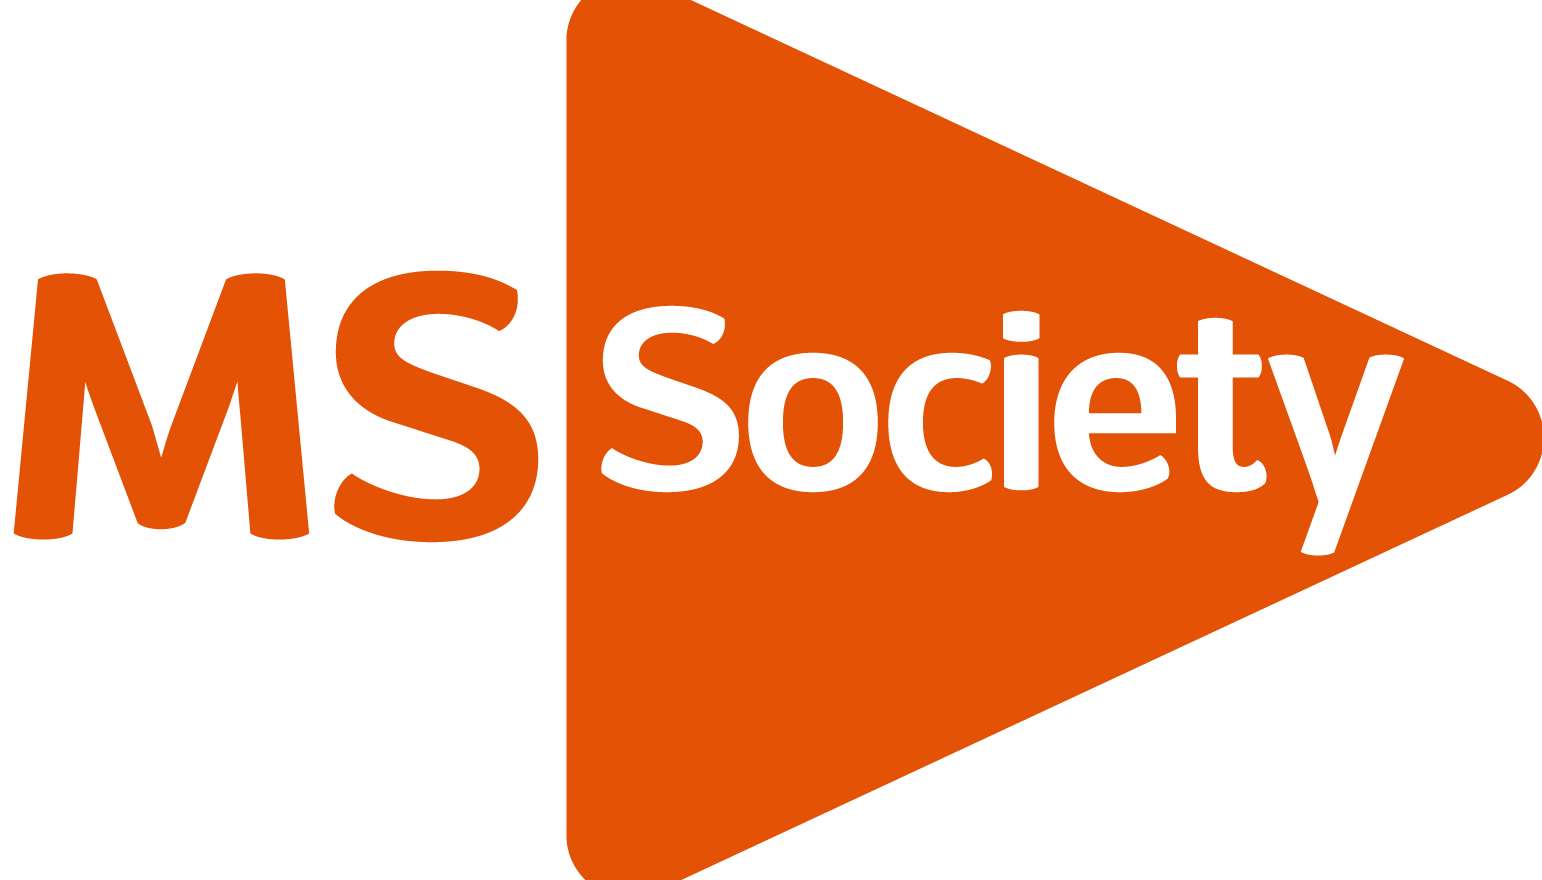 The Multiple Sclerosis Society is supporting those with the condition.